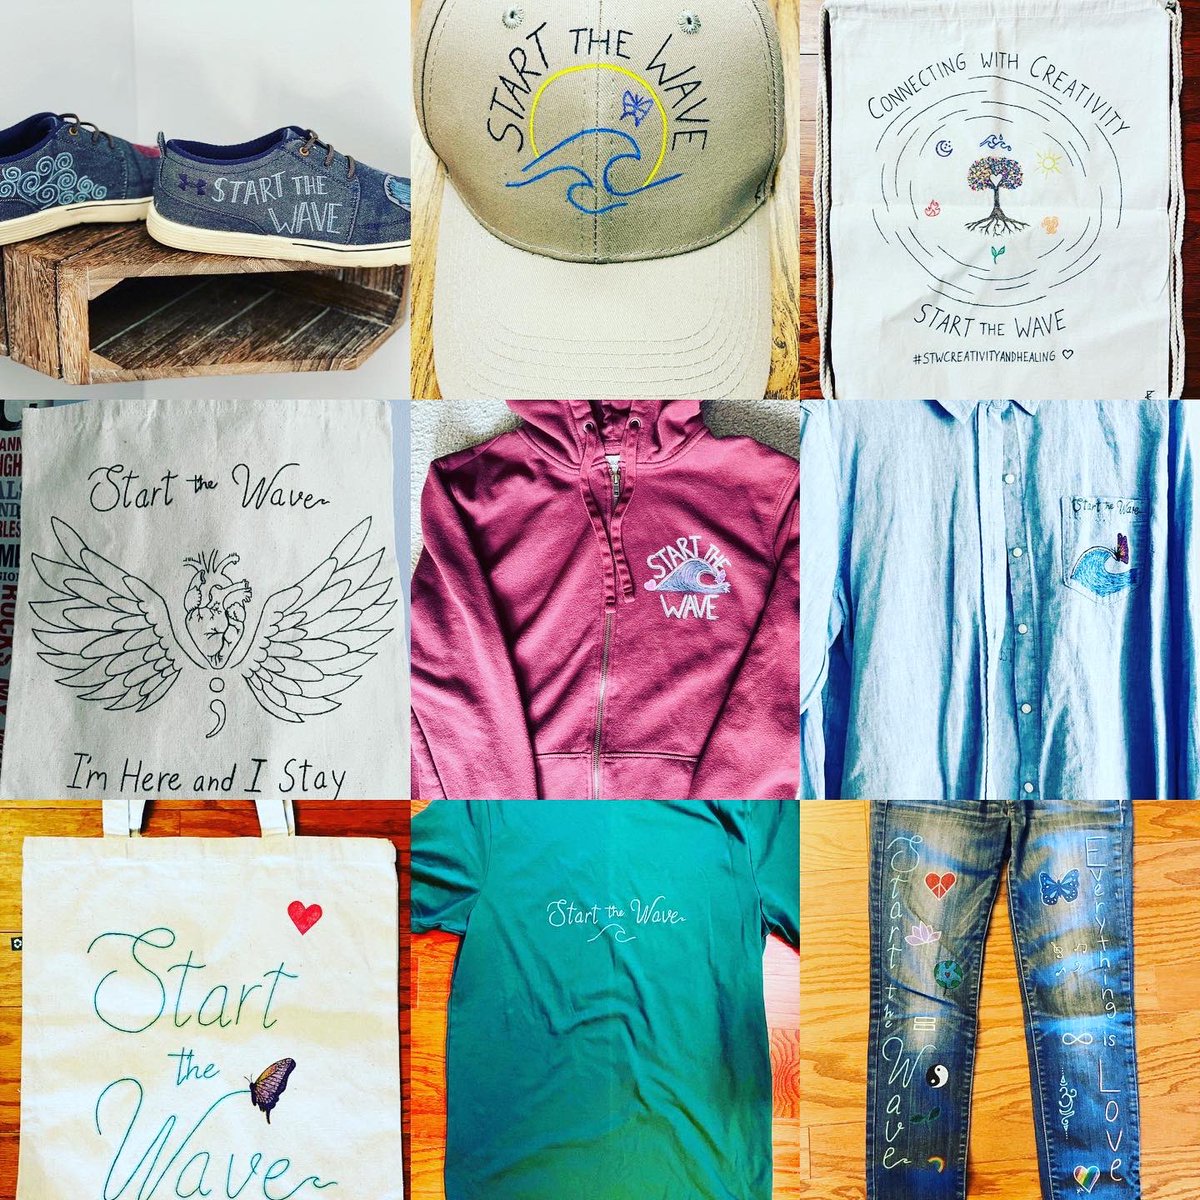 🌊 Looking for a cool gift idea? Check out these #STWEcoMerch pieces! 🌊

💚 A perfect way to show love for yourself, someone else, & our world! Spread the love & positivity through #StartTheWave’s messages! 💚

PS - You’ll also be supporting me & my art as a small business 🙏🏻❤️